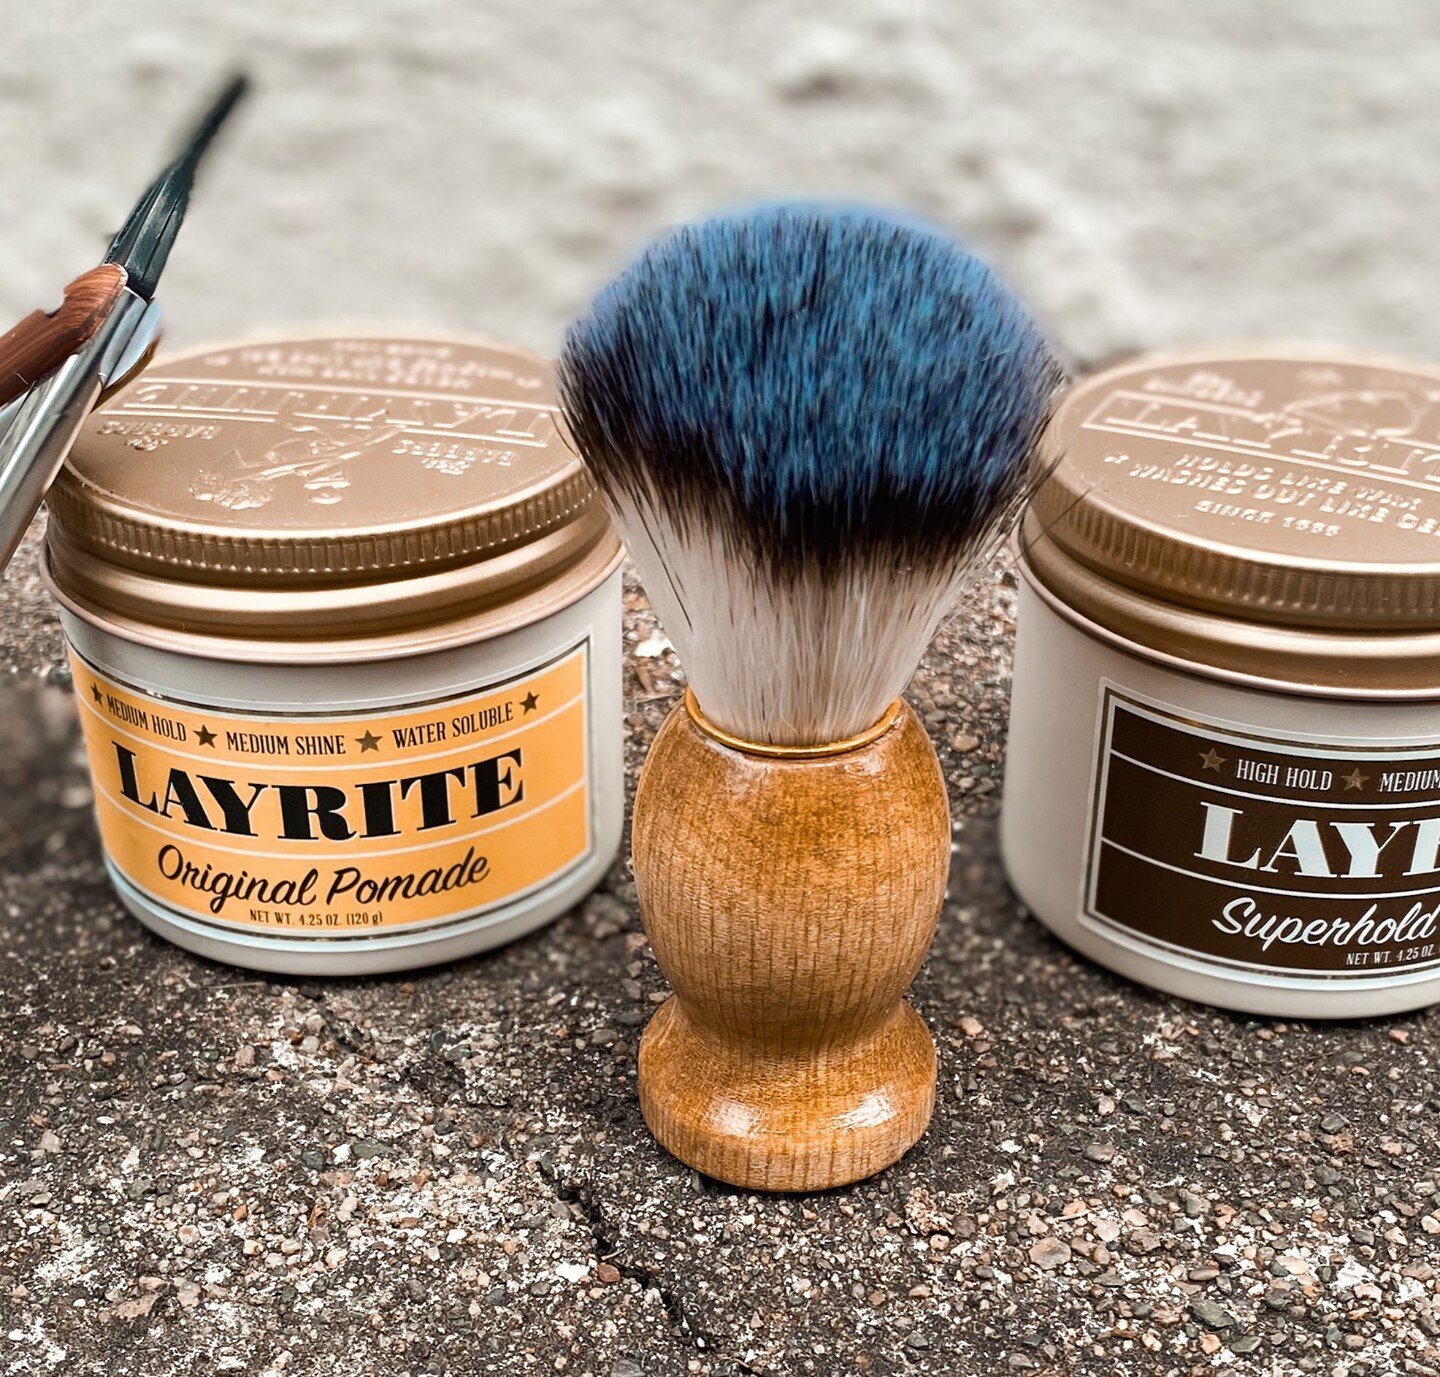 Original versatile water-based pomade that holds all day yet rinses out easily with water.

Holds Like Gel
Washes out Like Wax
.
.
.
#barber #barbershop #barberlife #barbershopconnect #haircut #fade #hair #barbers #hairstyle #barberlove #wahl #barber